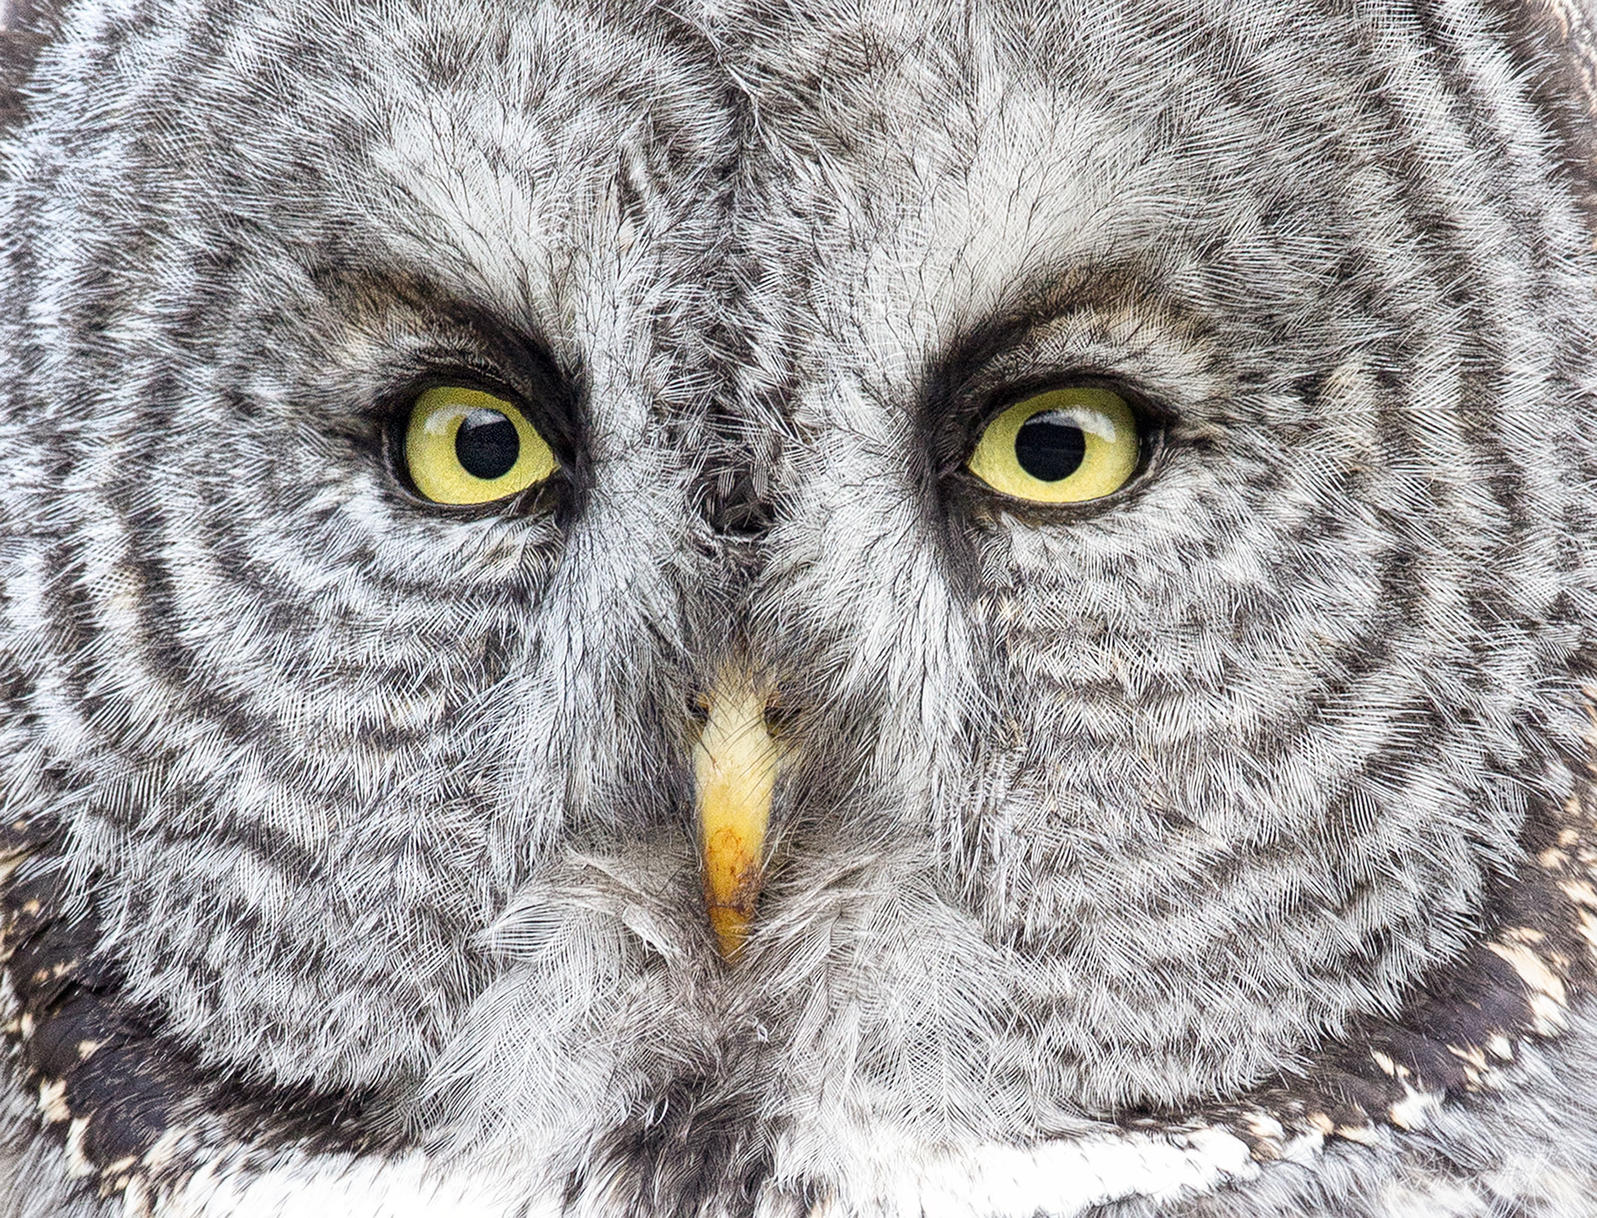 Which owl has the biggest eyesight?